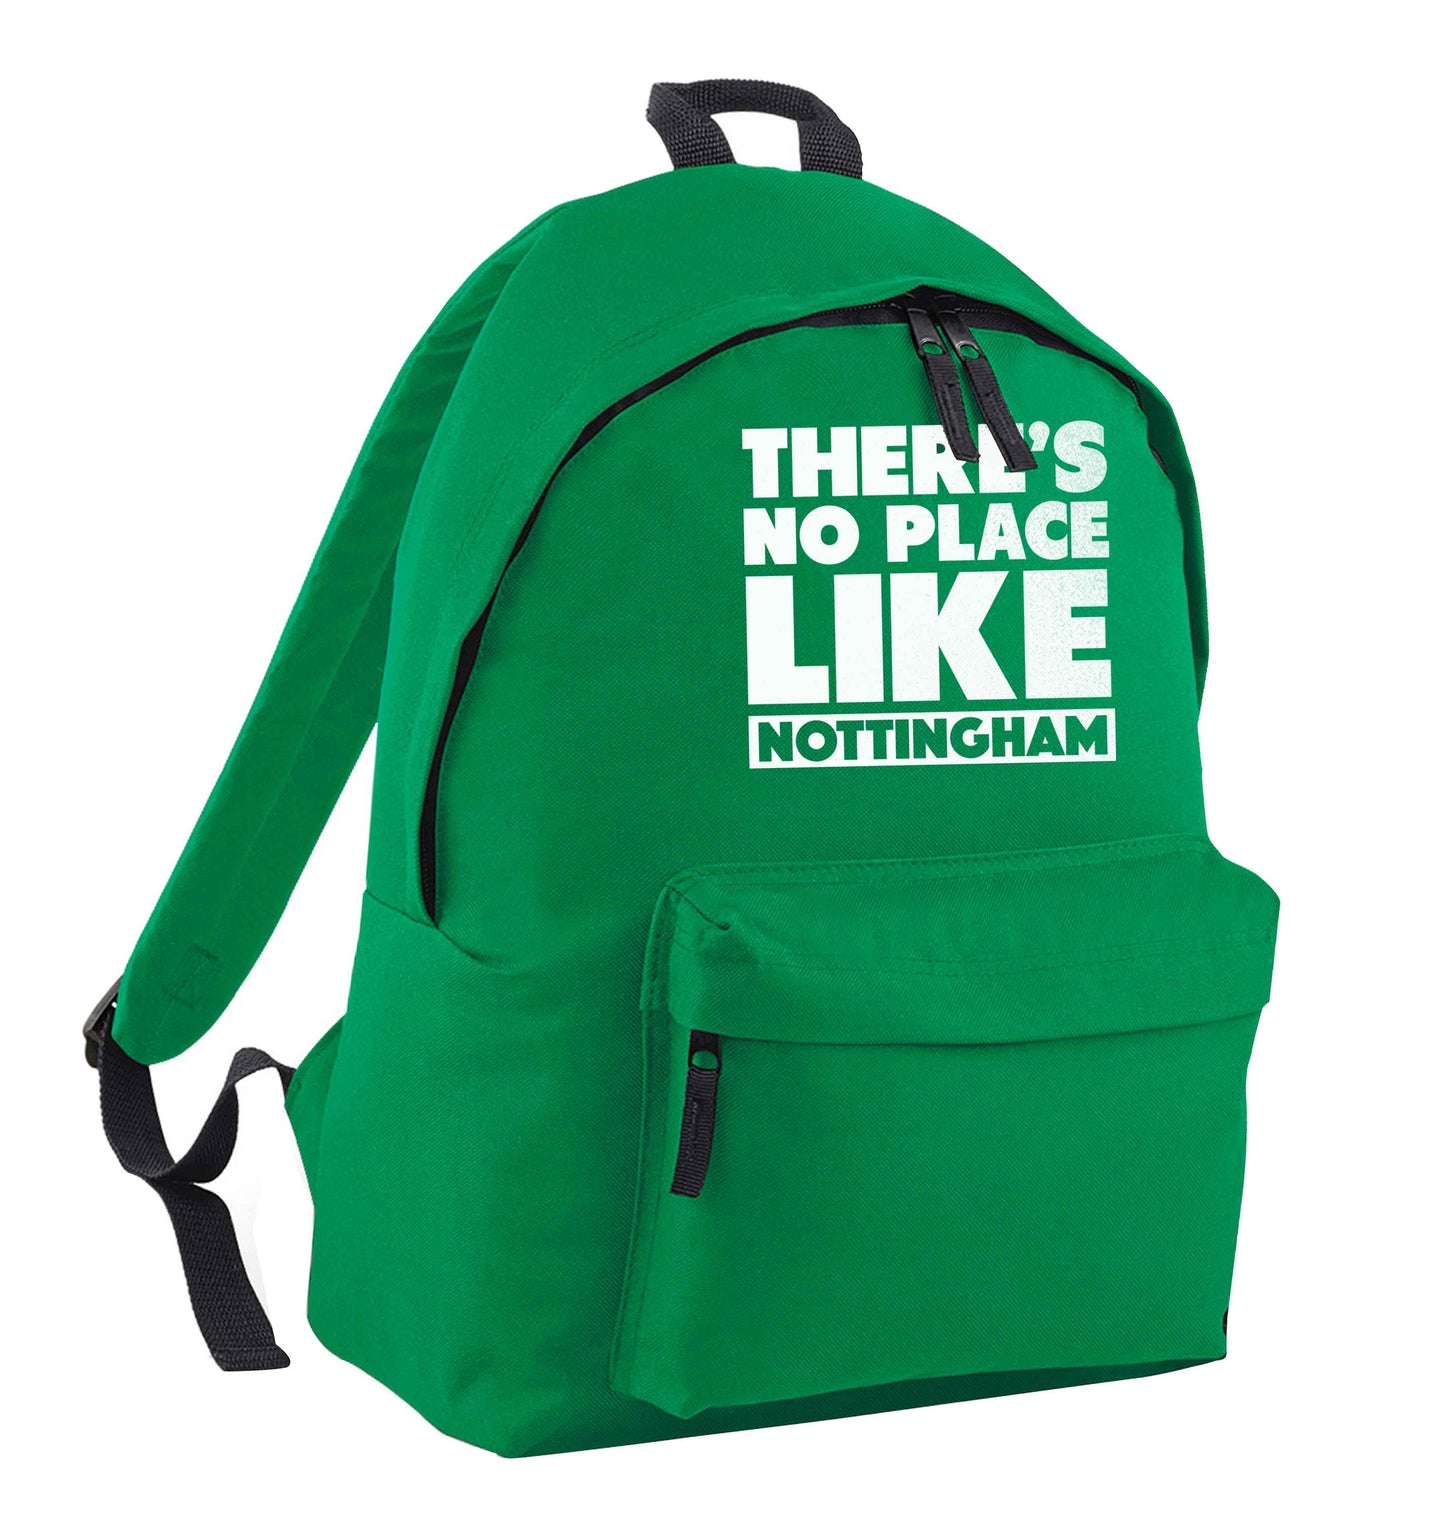 There's no place like Nottingham green adults backpack